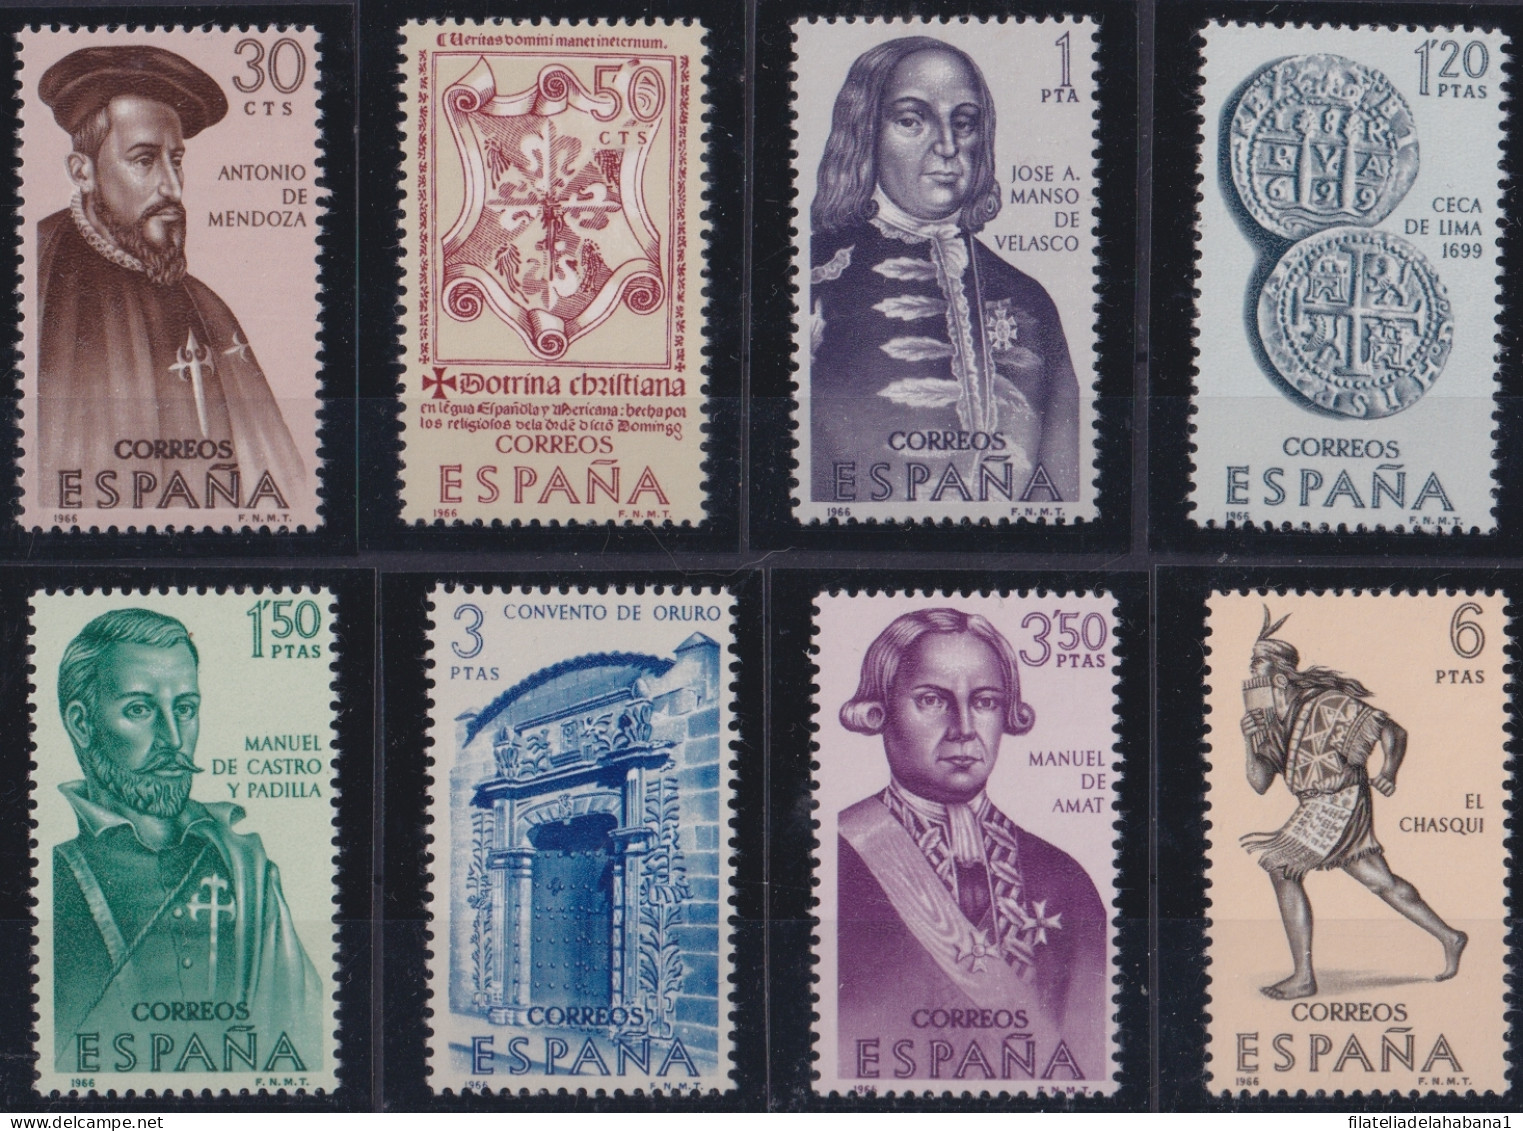 F-EX45188 SPAIN MNH 1966 CONQUEST & DISCOVERY OF AMERICA LIMA MINT PERU CHASQUI.  - Christophe Colomb